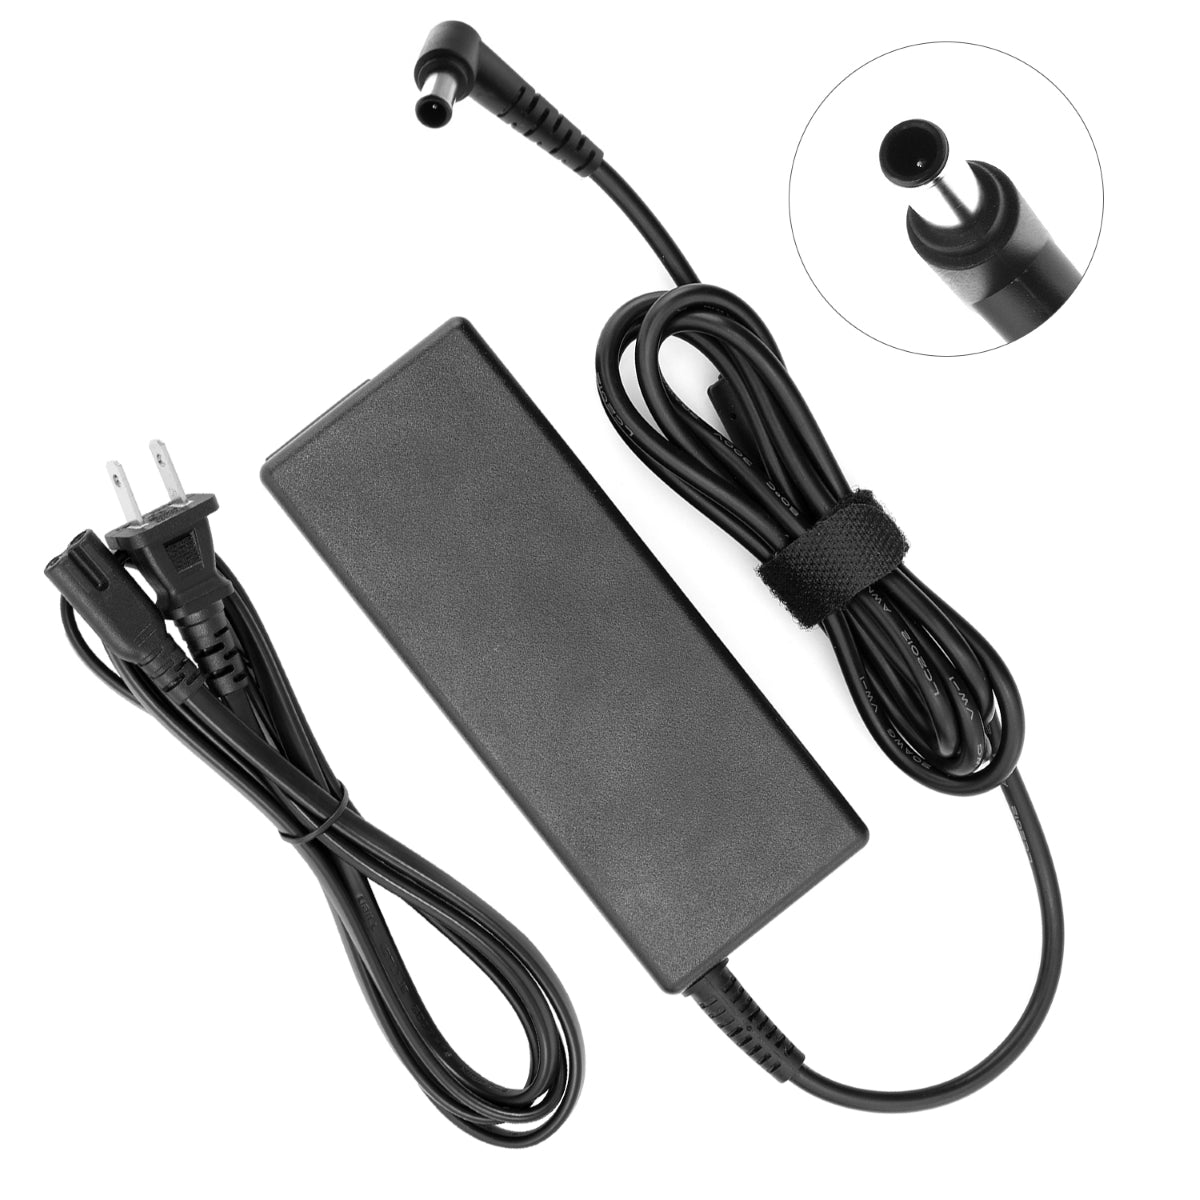 Power Adapter for LG 32UD59-B Monitor TV